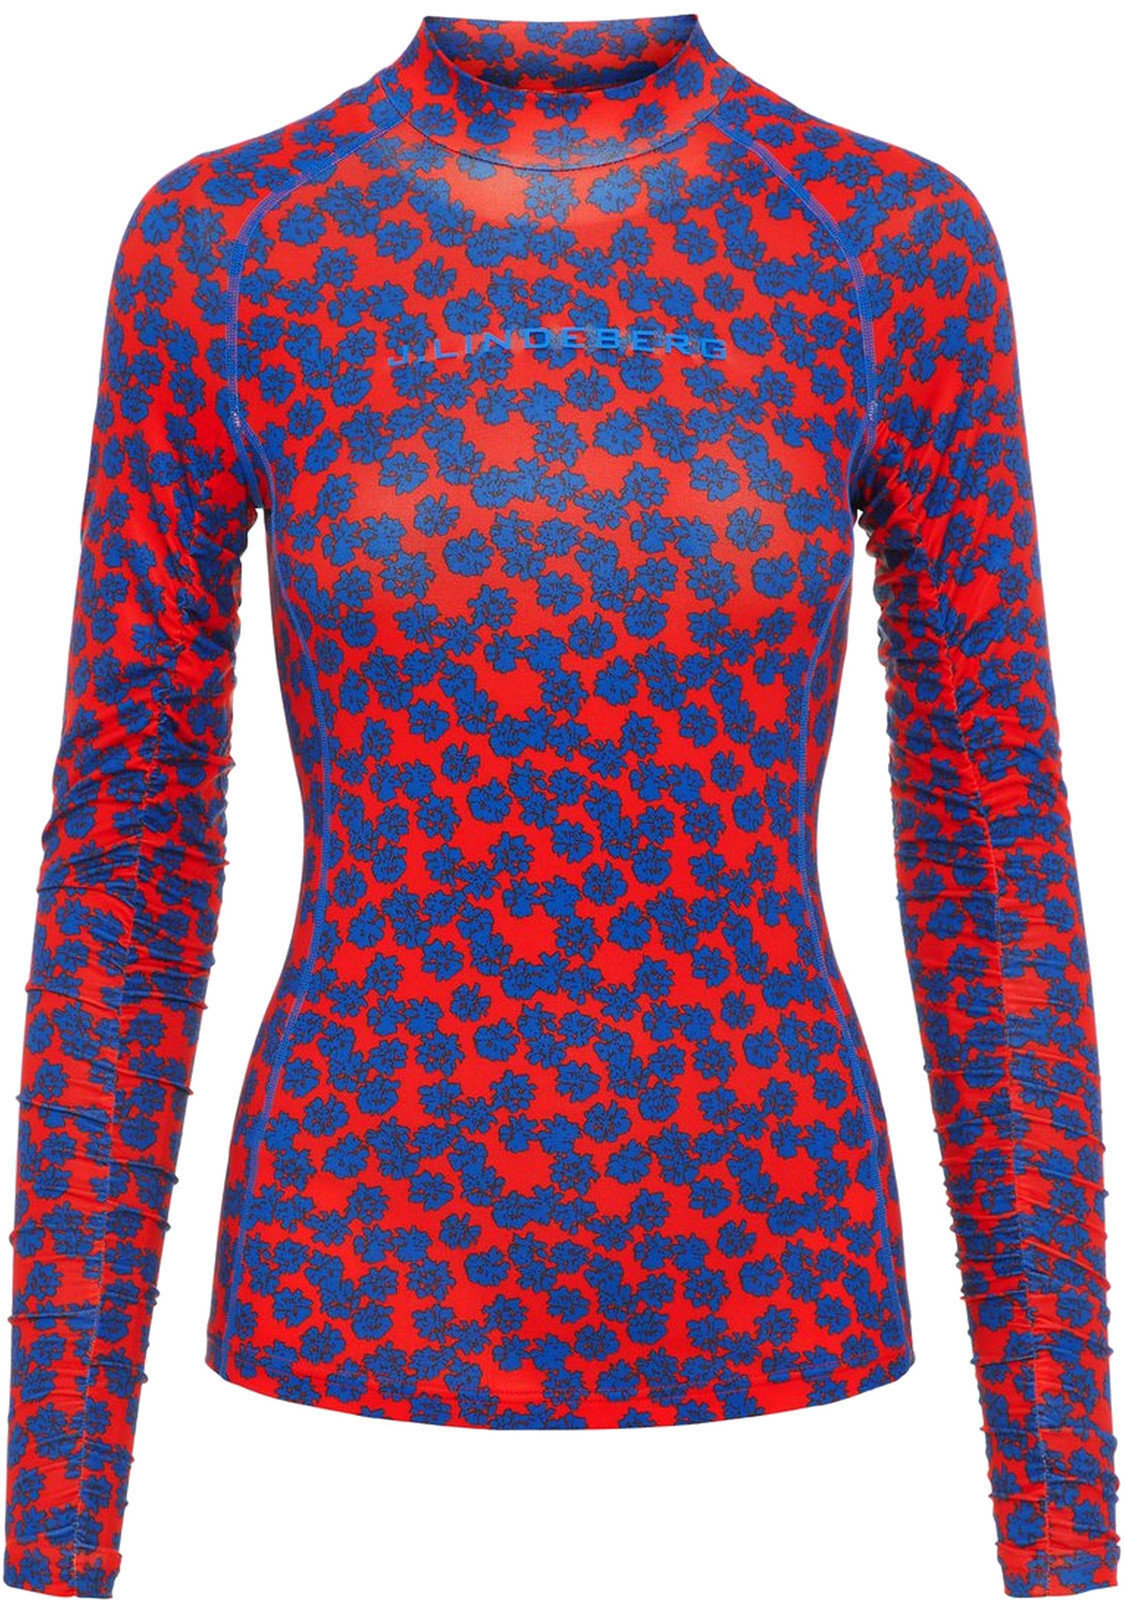 Thermal Clothing J.Lindeberg Tori Soft Compression Womens Basel Lyer Racing Red Flower XS